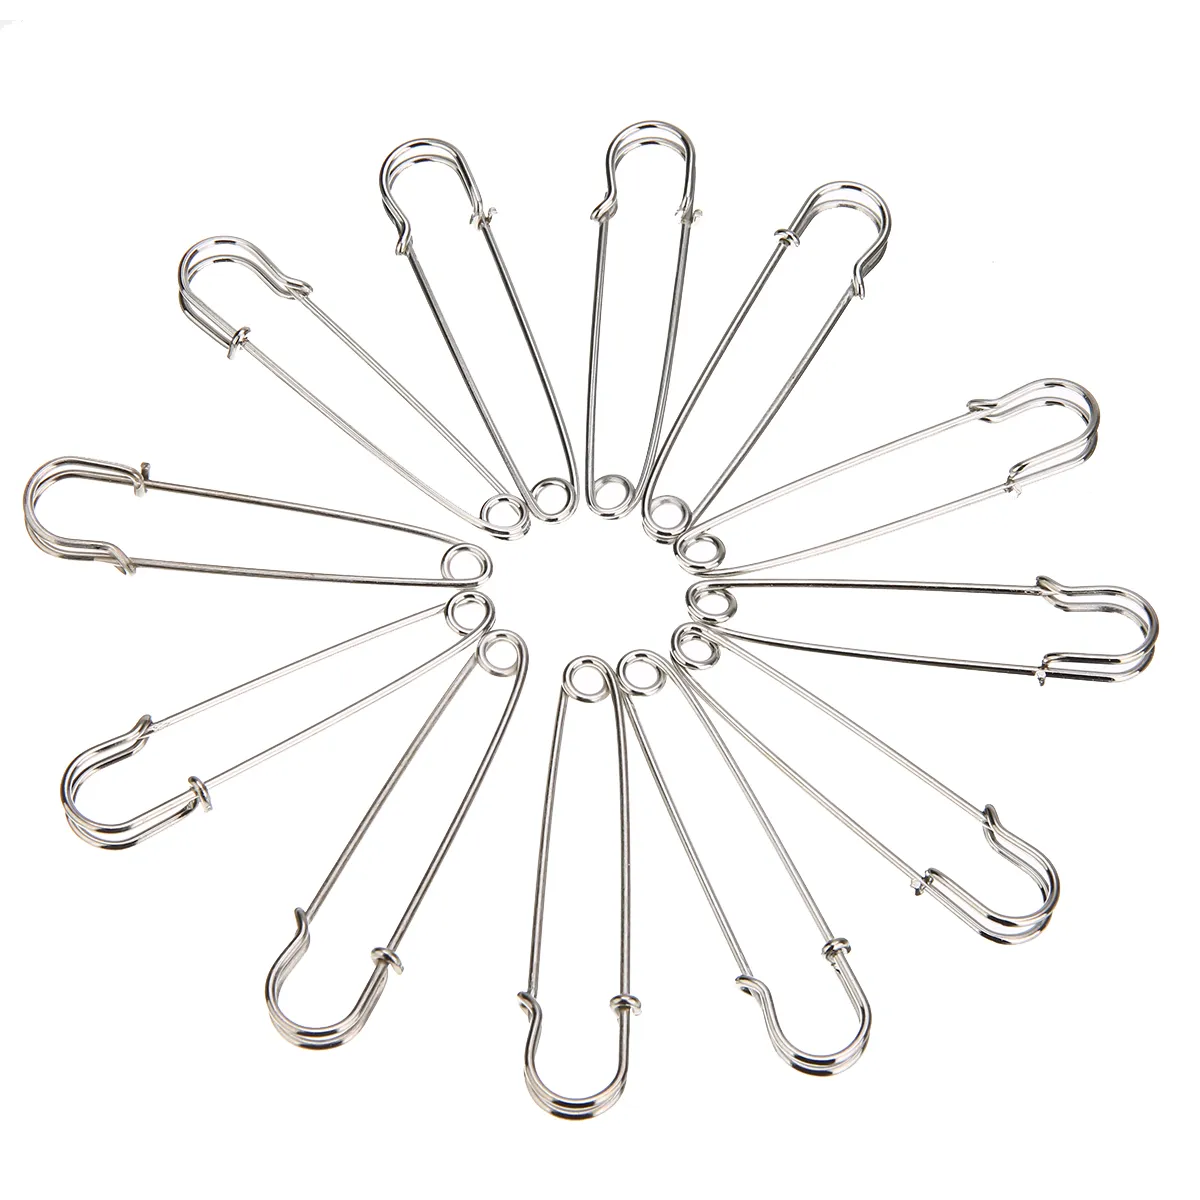 12pcs Large Heavy Duty Stainless Steel Big Jumbo Safety Pin Blanket Crafting for Making Wedding Bouquet Brooch DIY Decoration